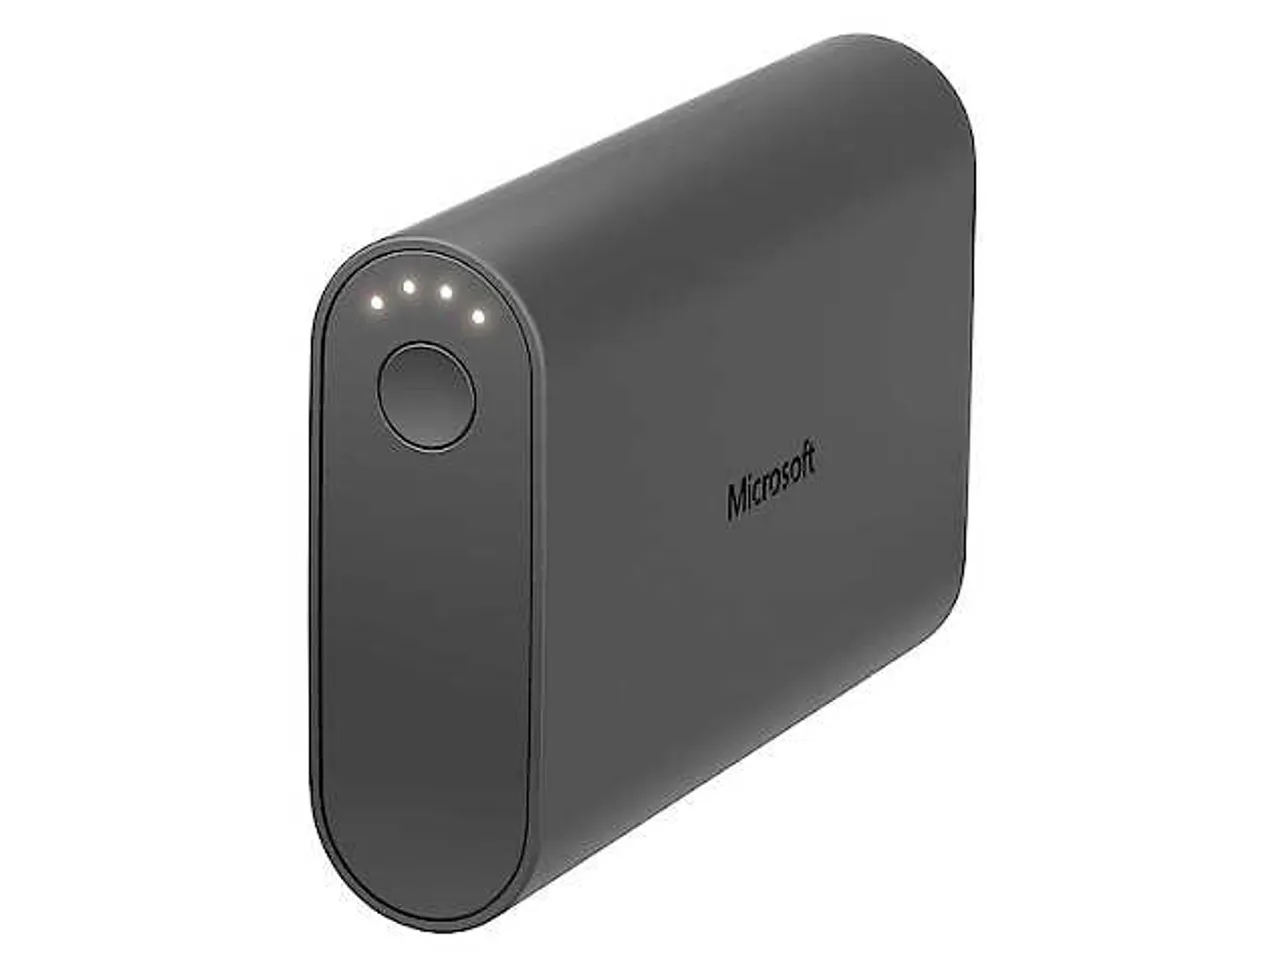 Microsoft enters portable power banks market; price starts at Rs. 2,200